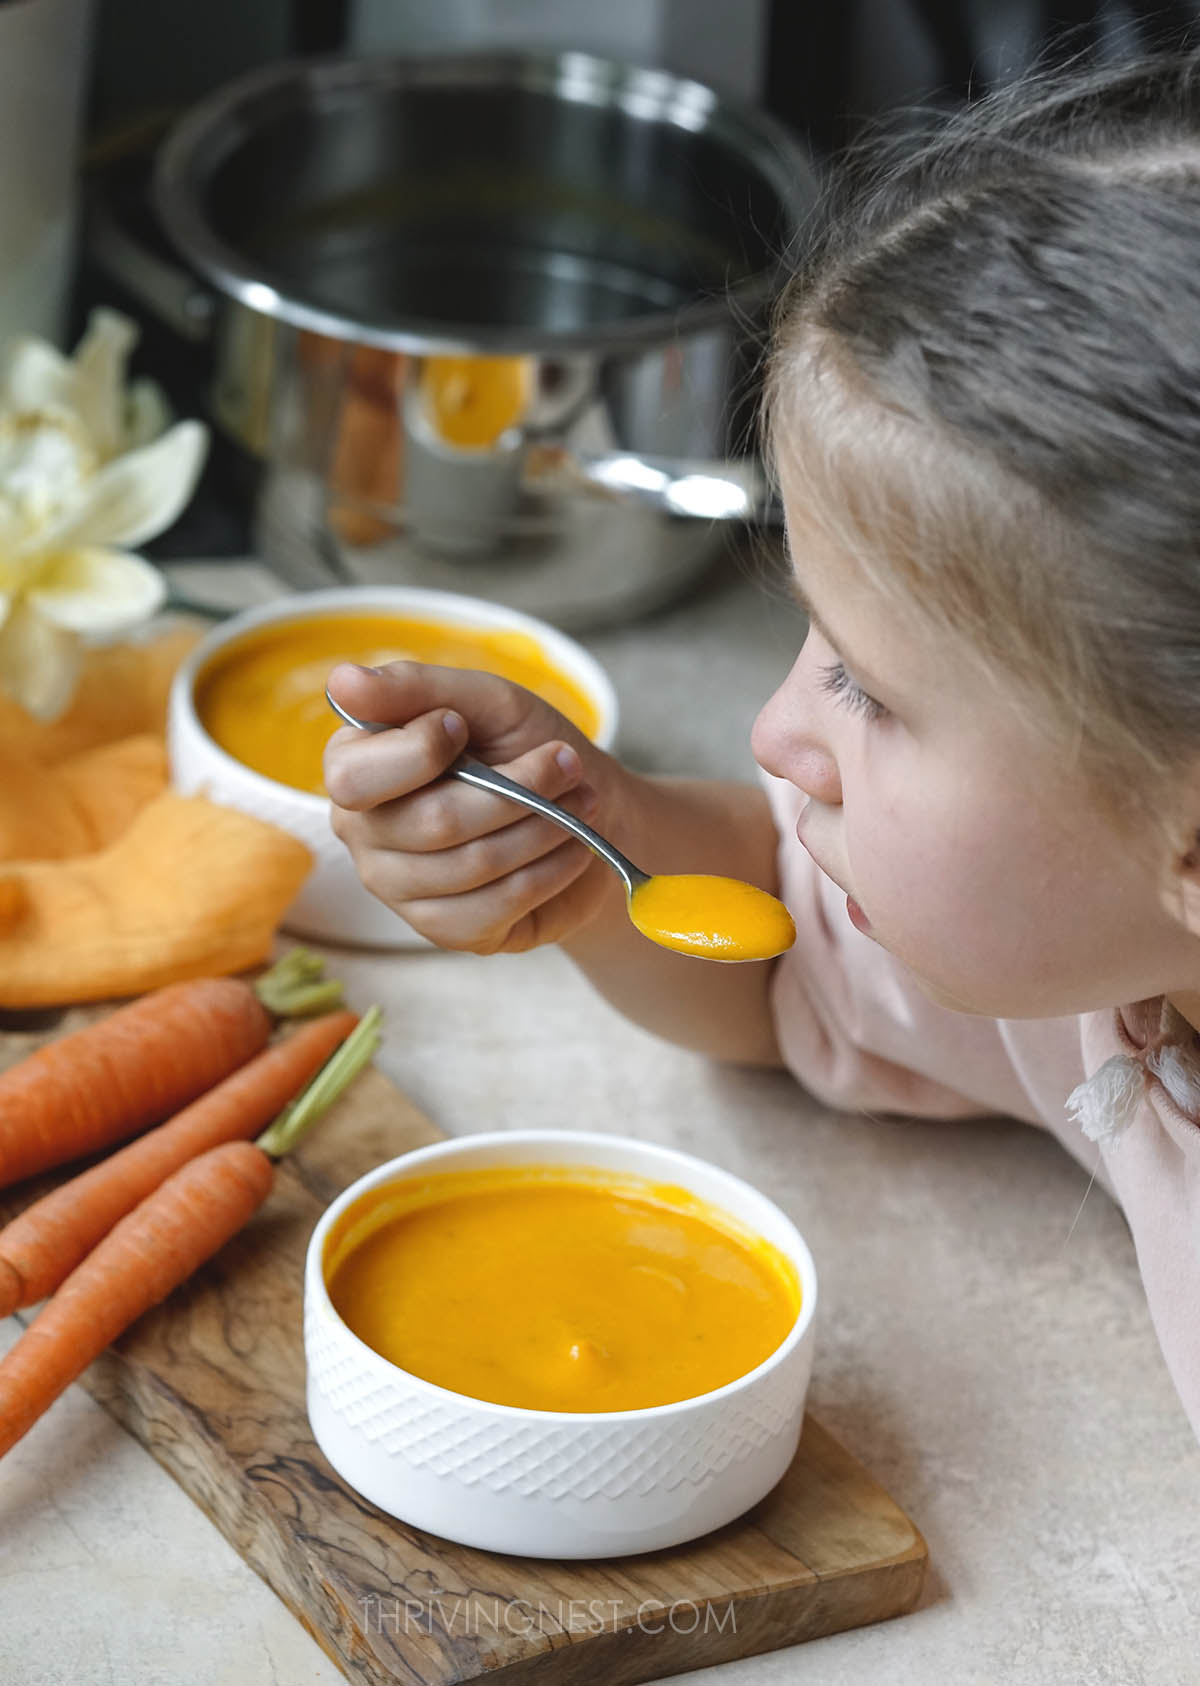 My daughter eating carrot soup.